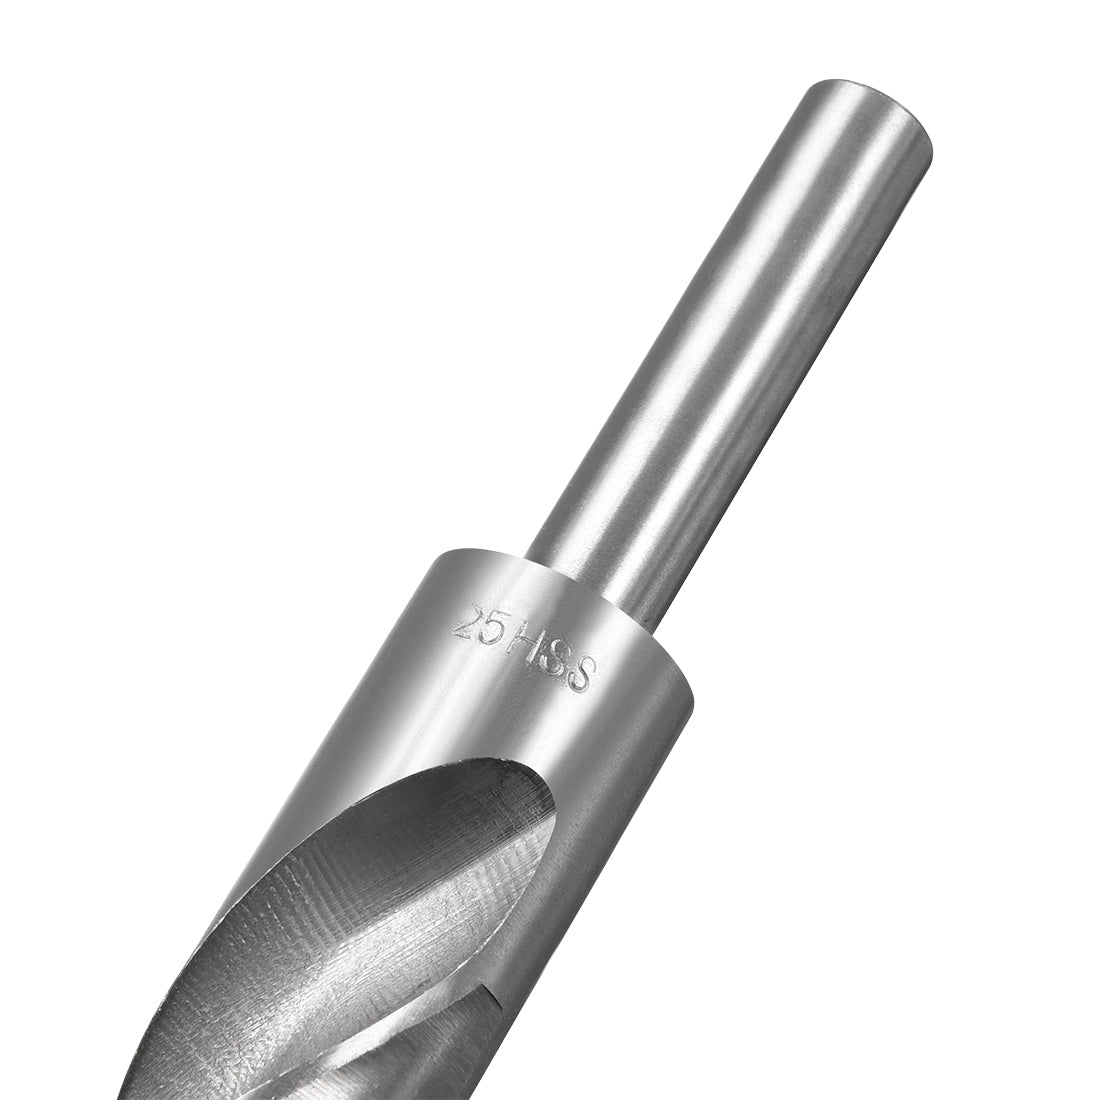 uxcell Uxcell 25mm Reduced Shank Drill Bit High Speed Steel 4241 with 1/2" Straight Shank